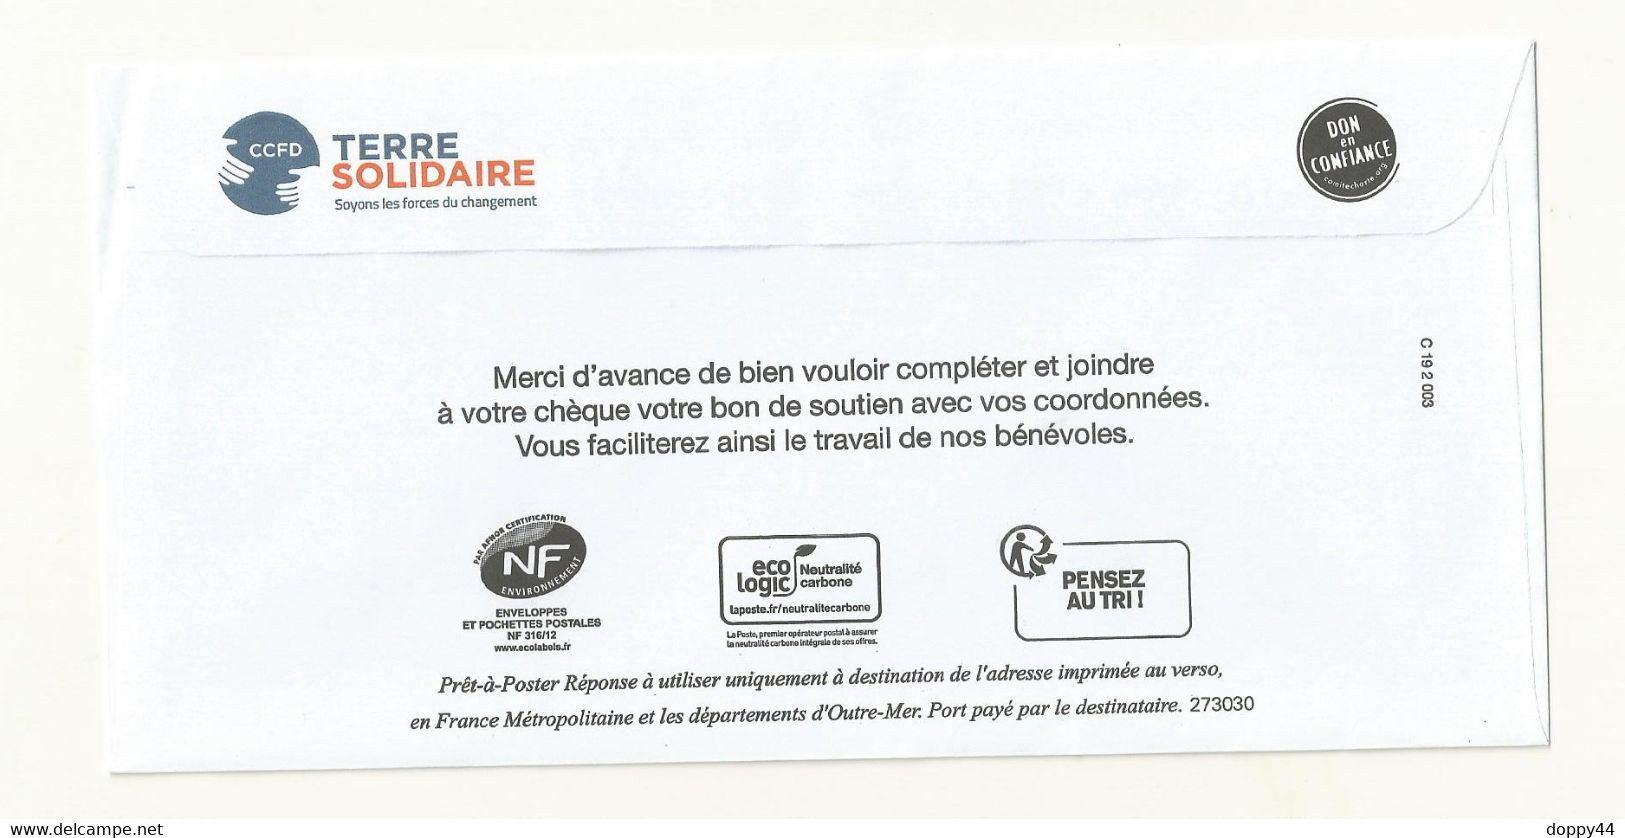 POSTREPONSE PRIO CCFD-TERRE SOLIDAIRE LOT 273030. - PAP: Antwort/Marianne L'Engagée